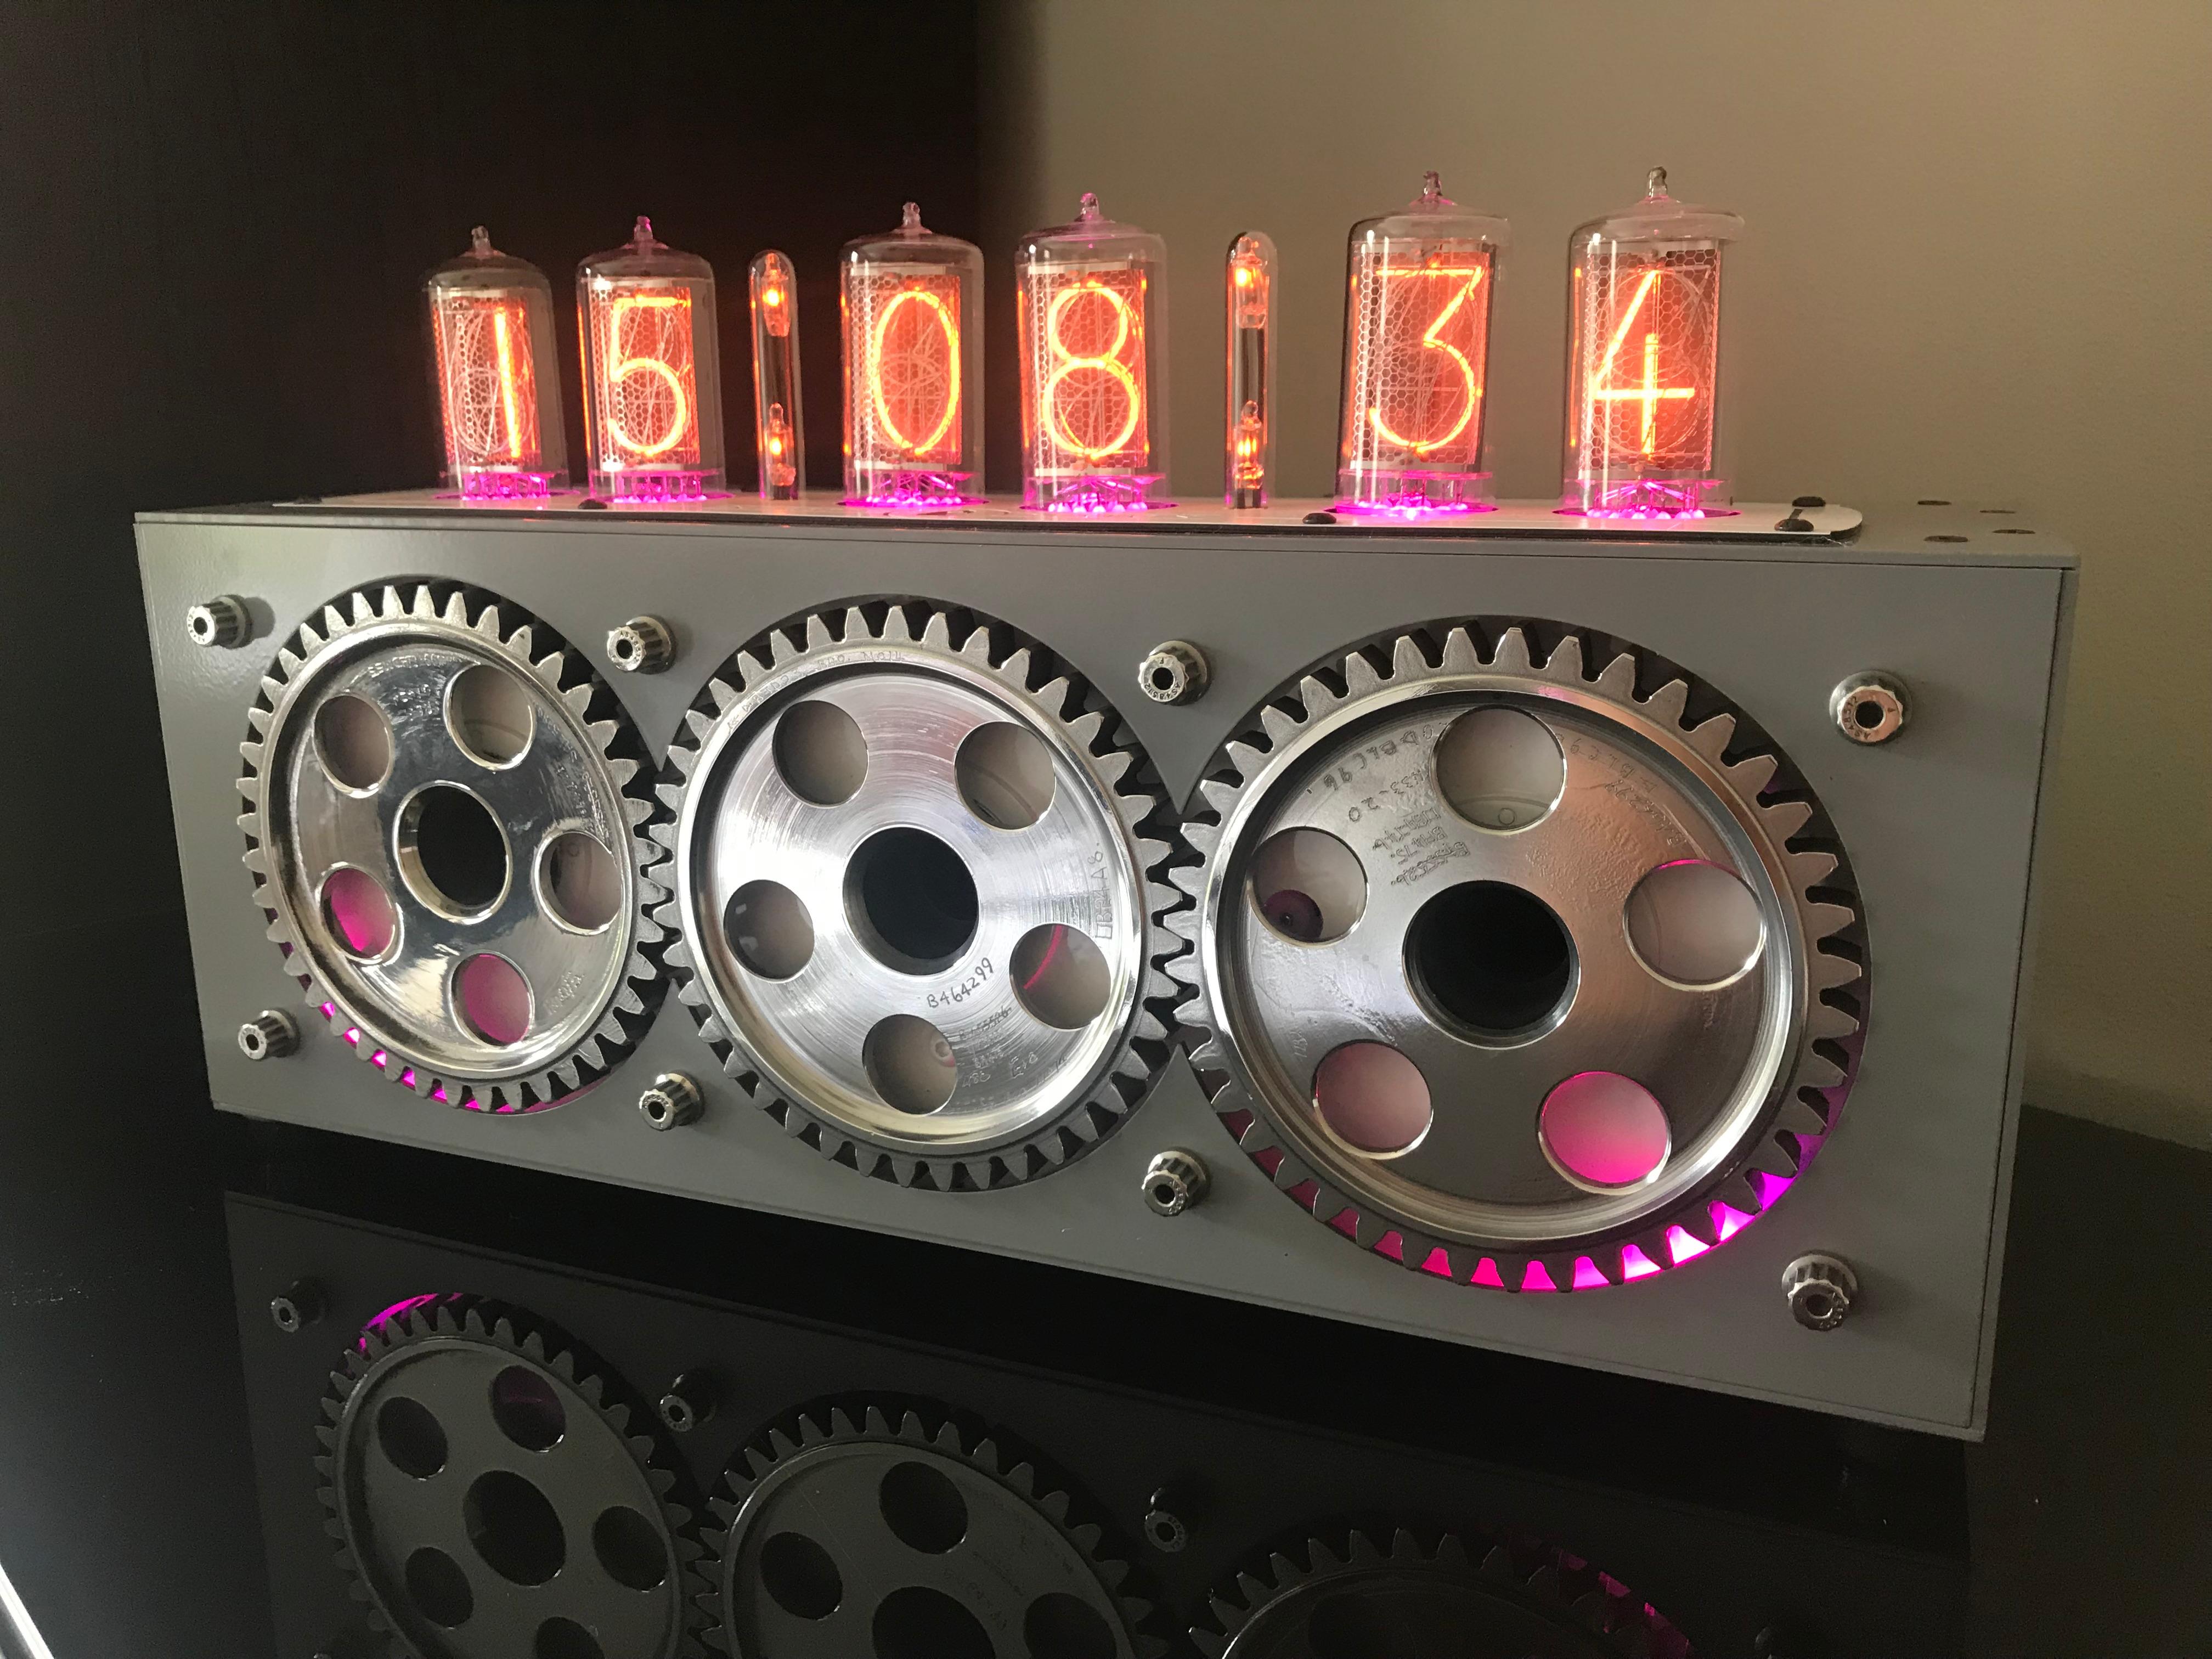 Designed by Intrepid Design using parts from a Harrier Jump Jet engine, we have created a limited number of Cog Nixie Clocks. The Nixie tube, or cold cathode display is an electronic device for displaying numbers using glow discharge.

The clock